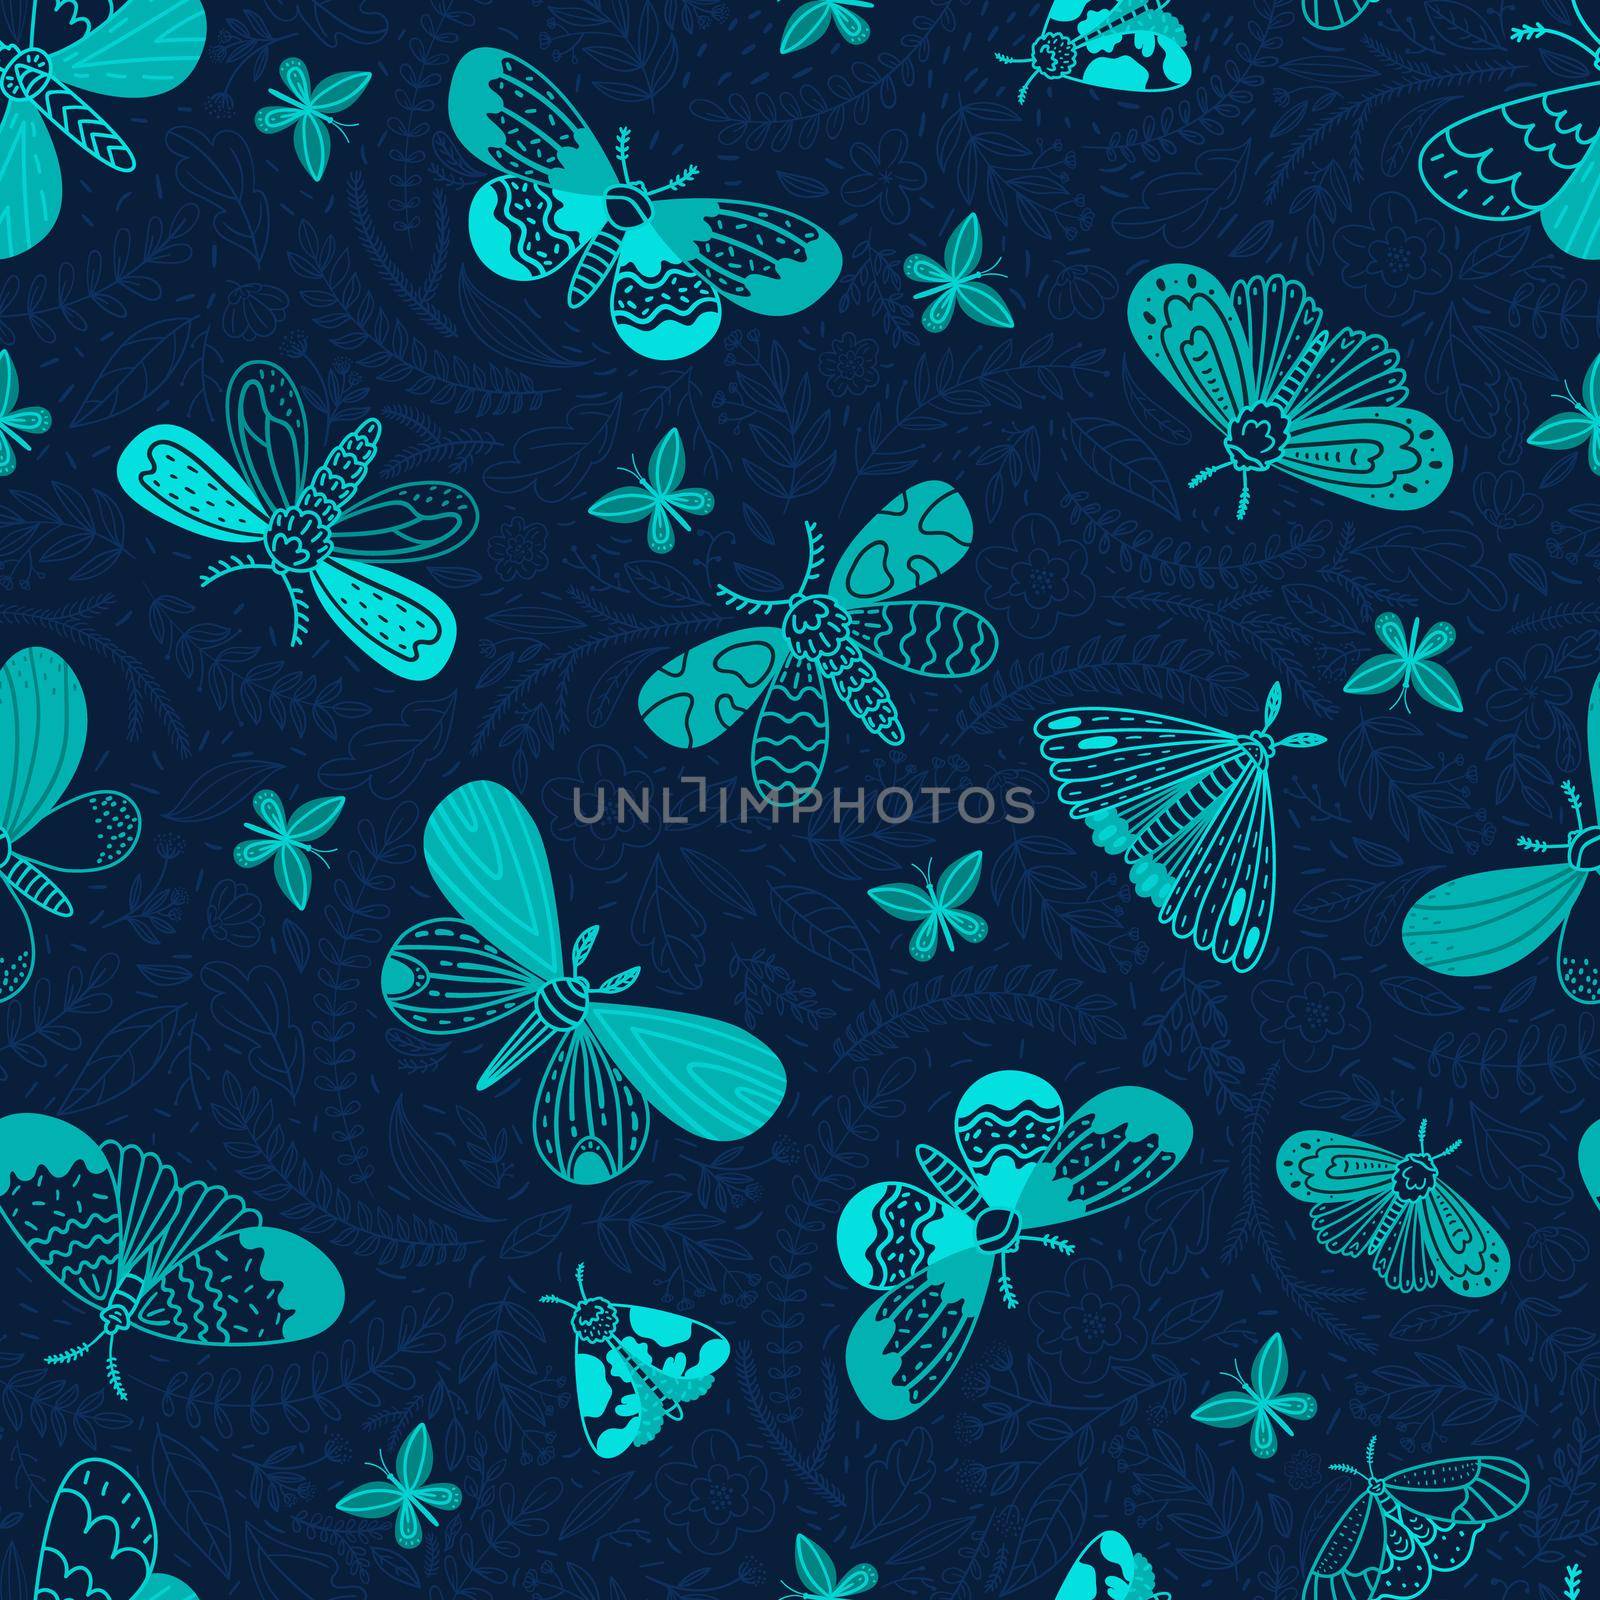 Night moths. Seamless pattern in doodle style. Night butterflies, leaves and flowers on a dark blue background. Vector illustration.